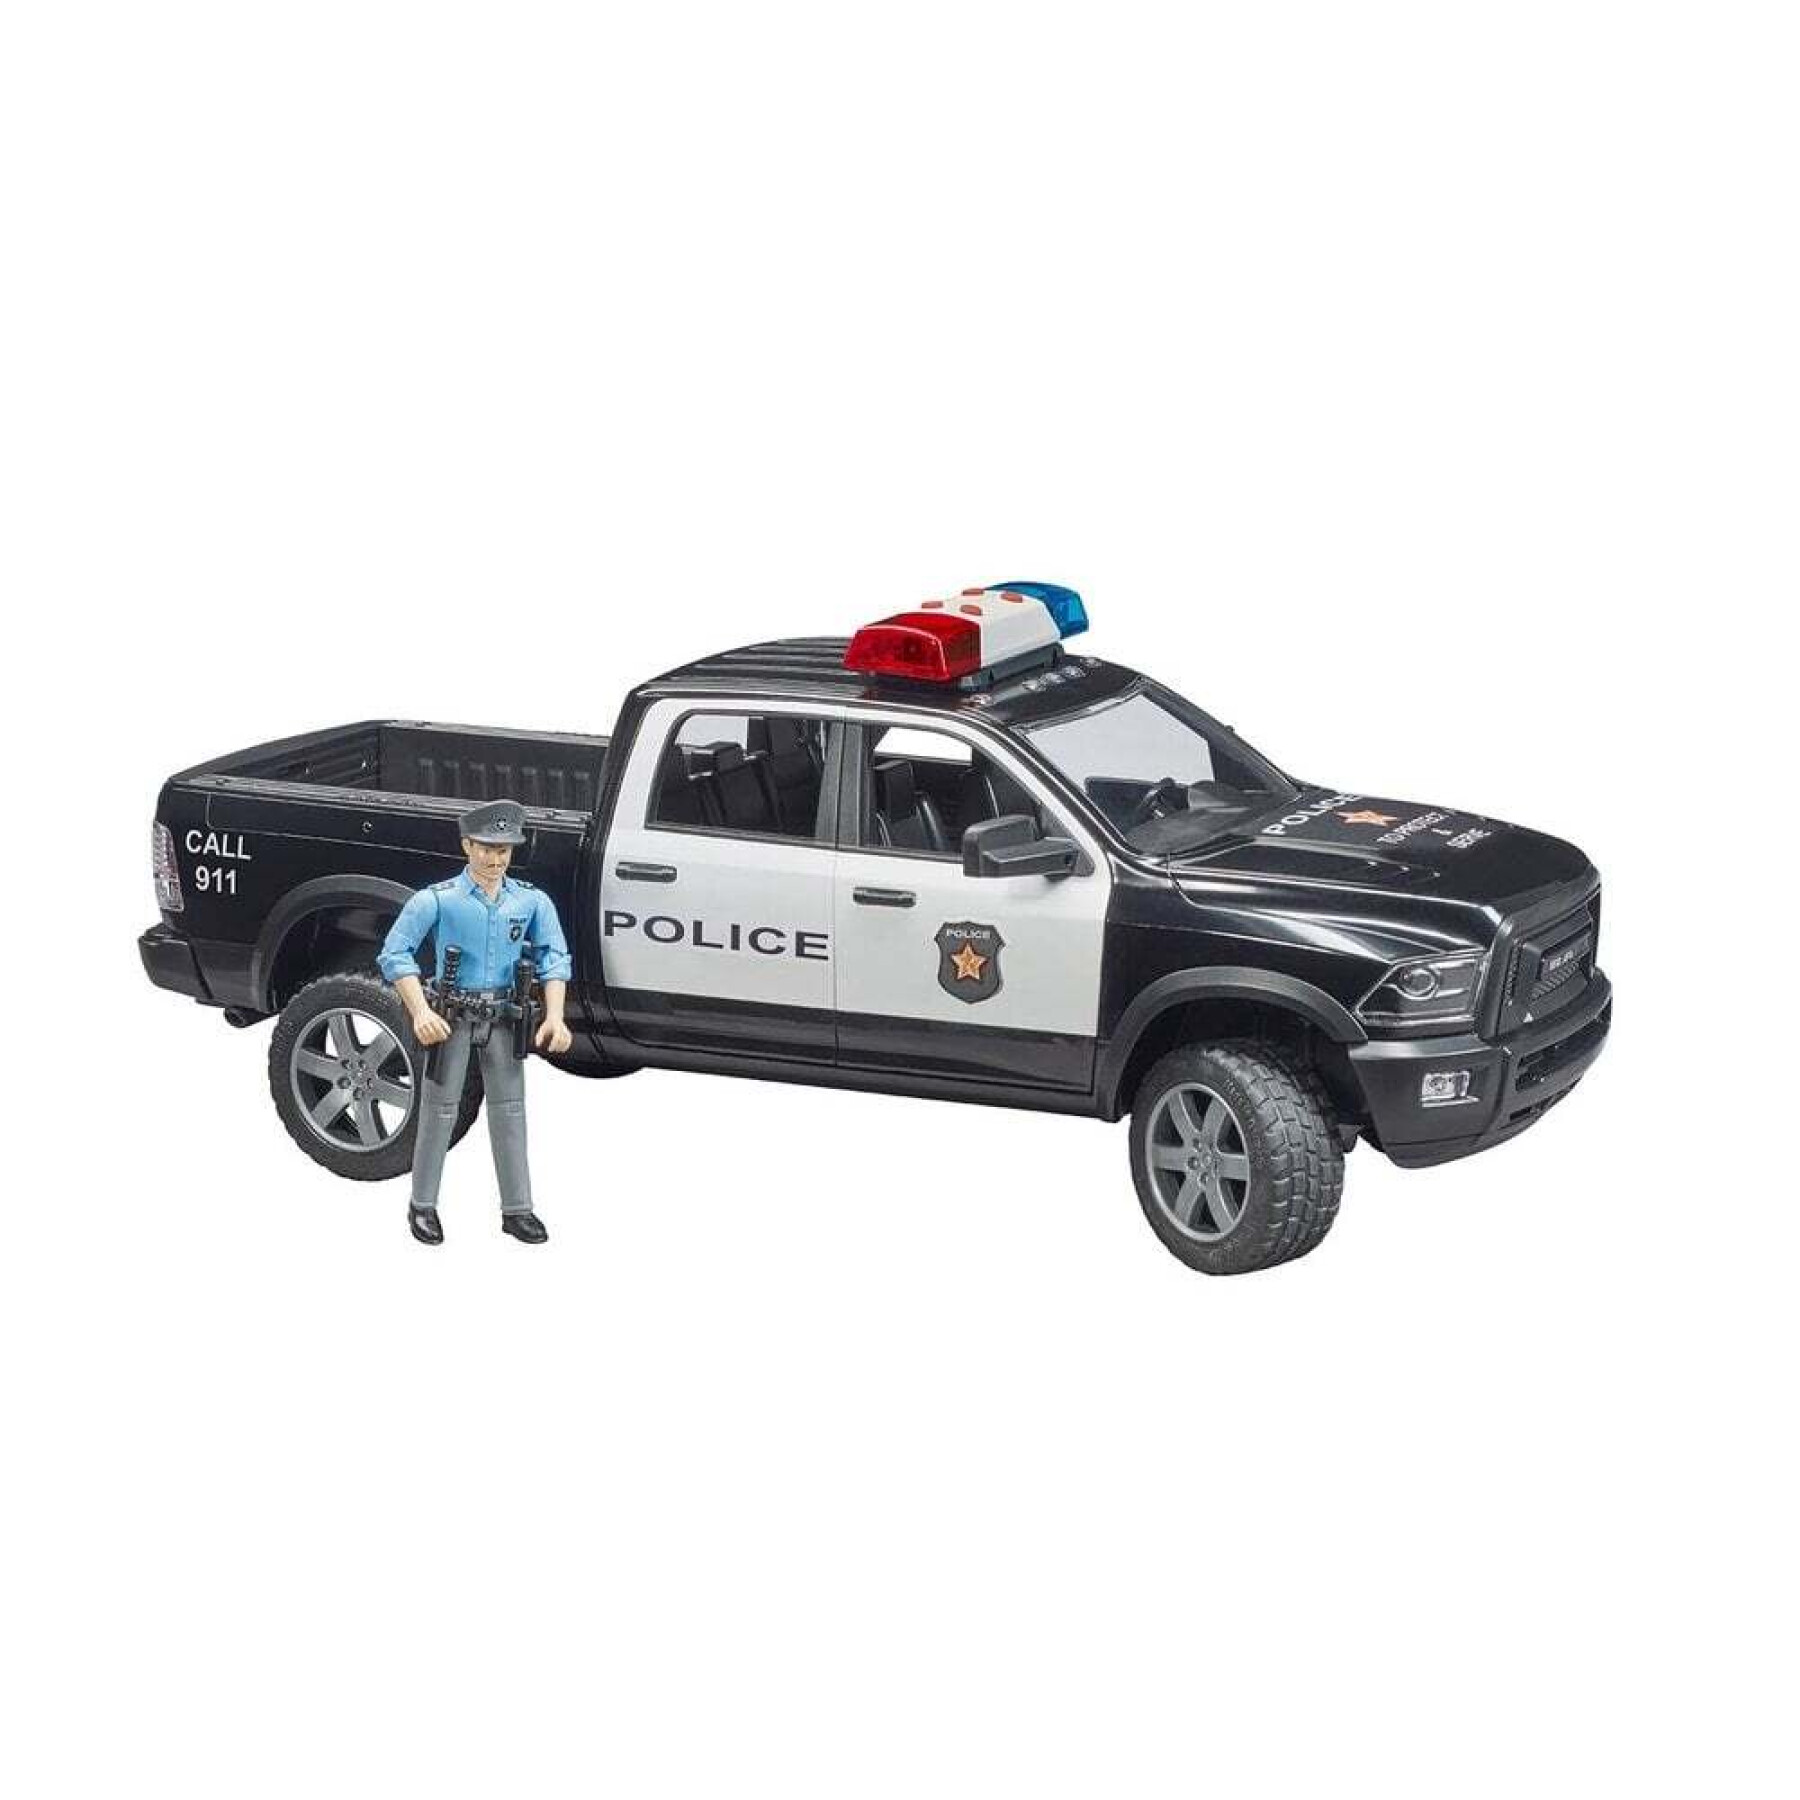 Car games - ram 2500 police truck with policeman Bruder